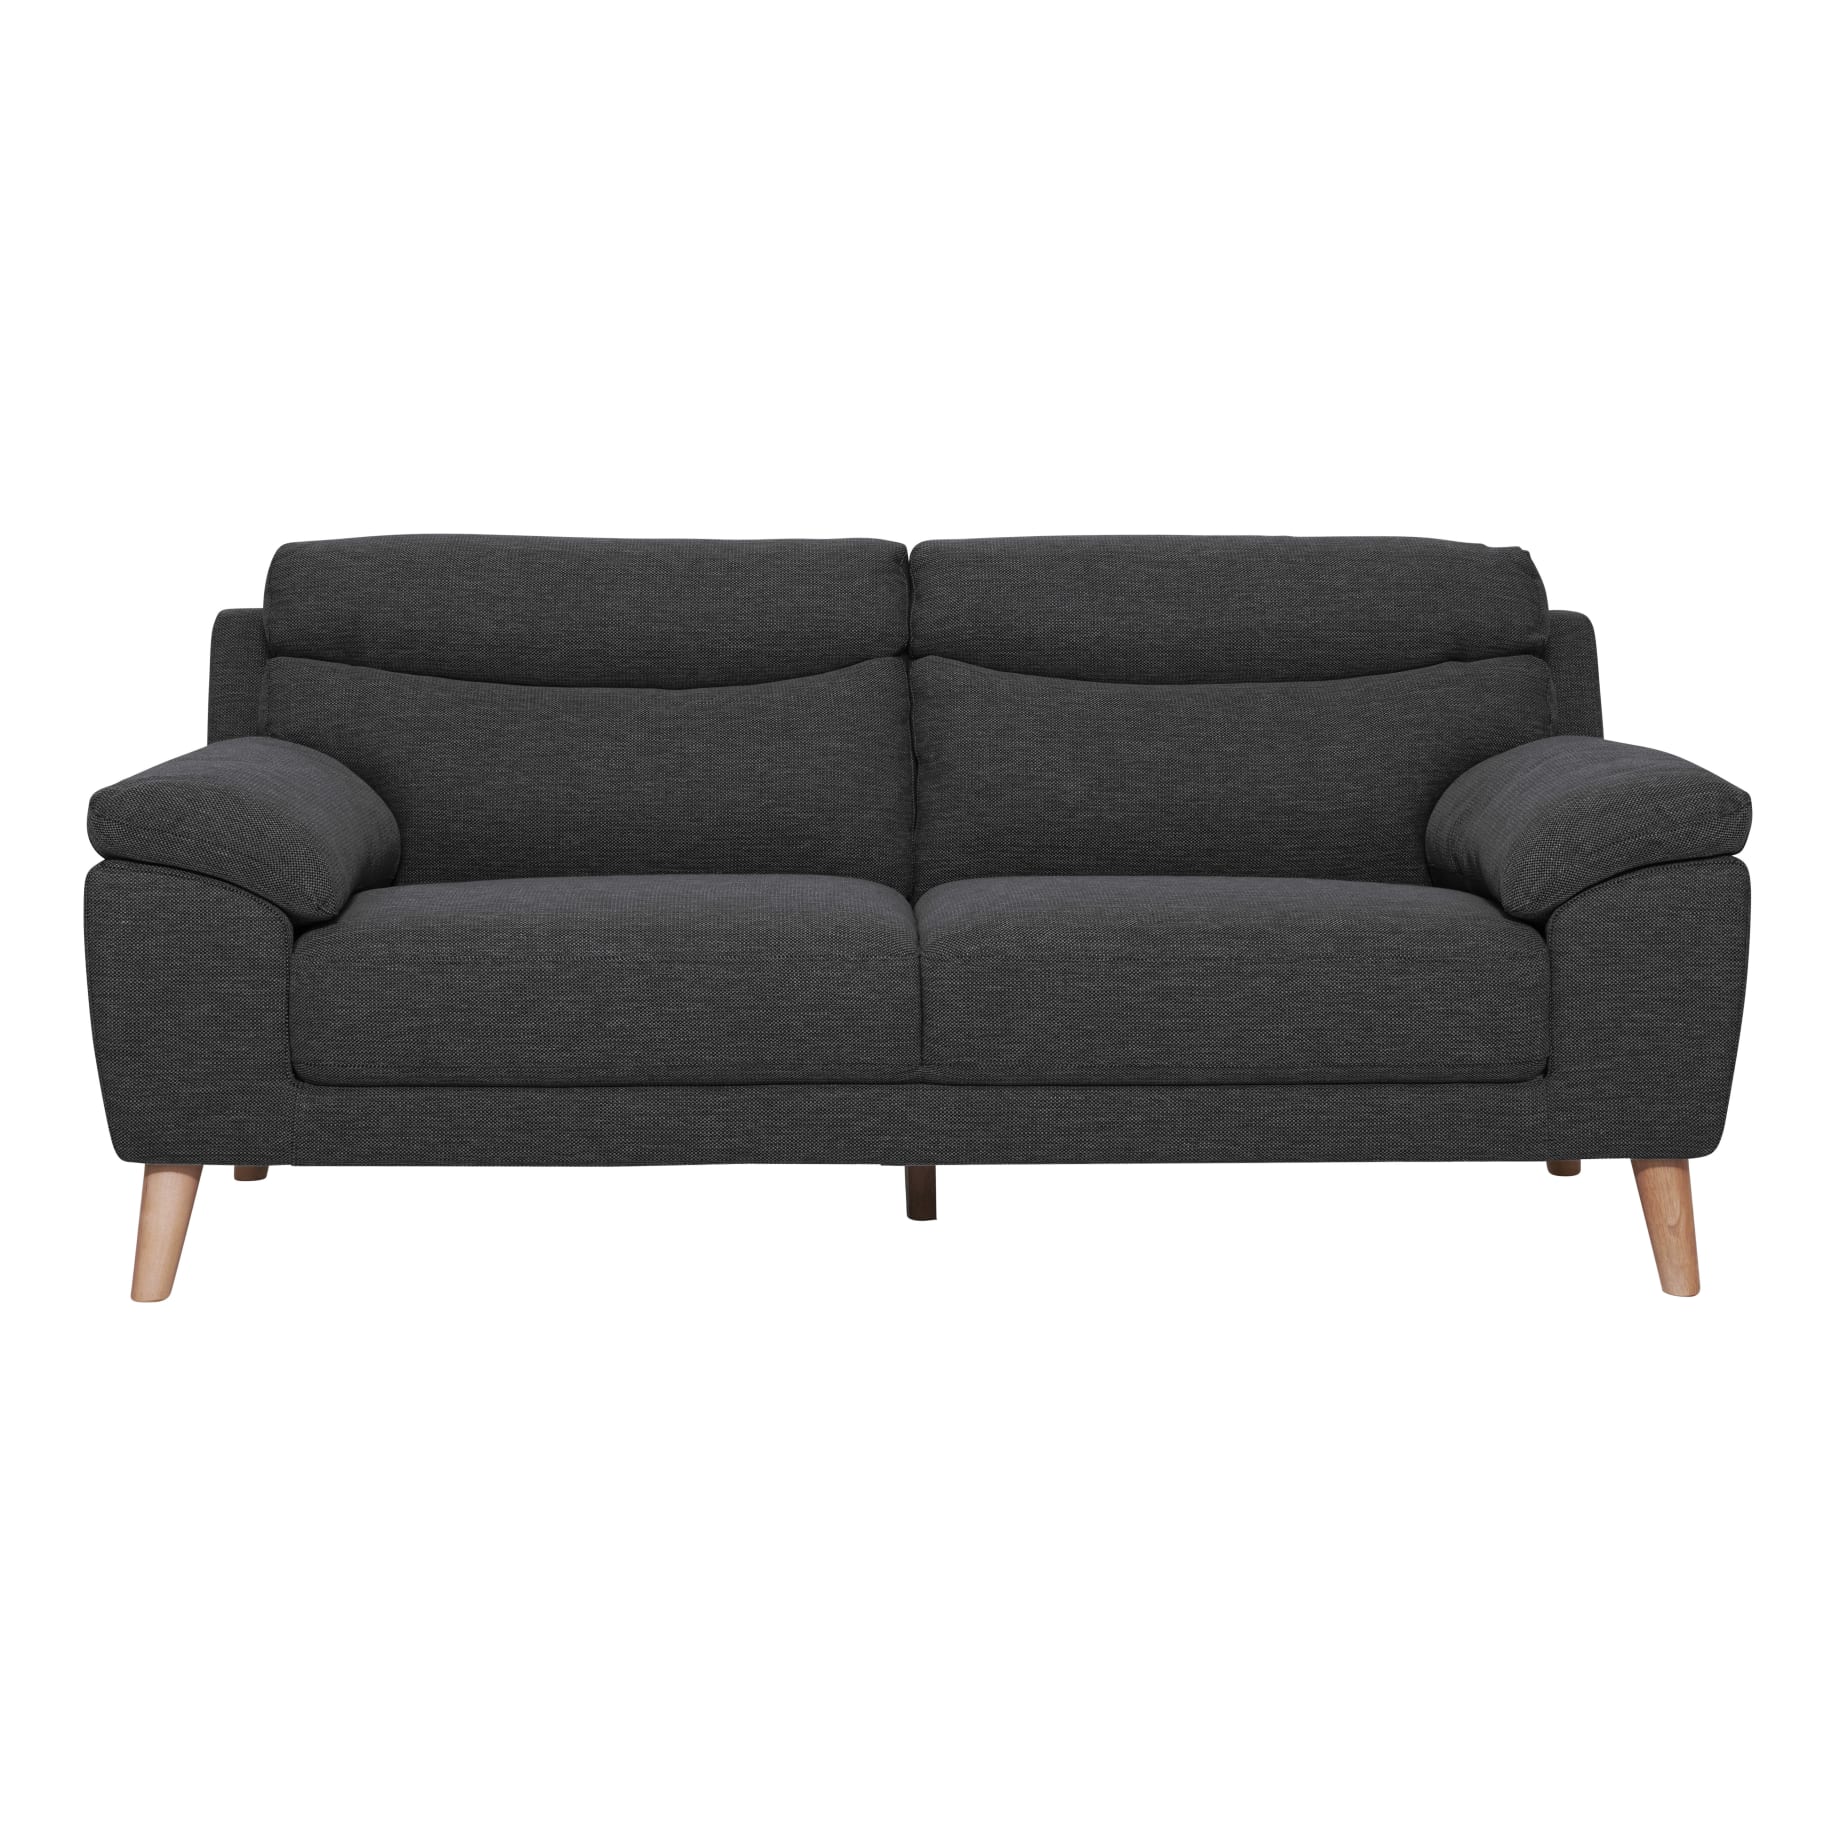 Bronco 3 Seater Sofa in Talent Charcoal